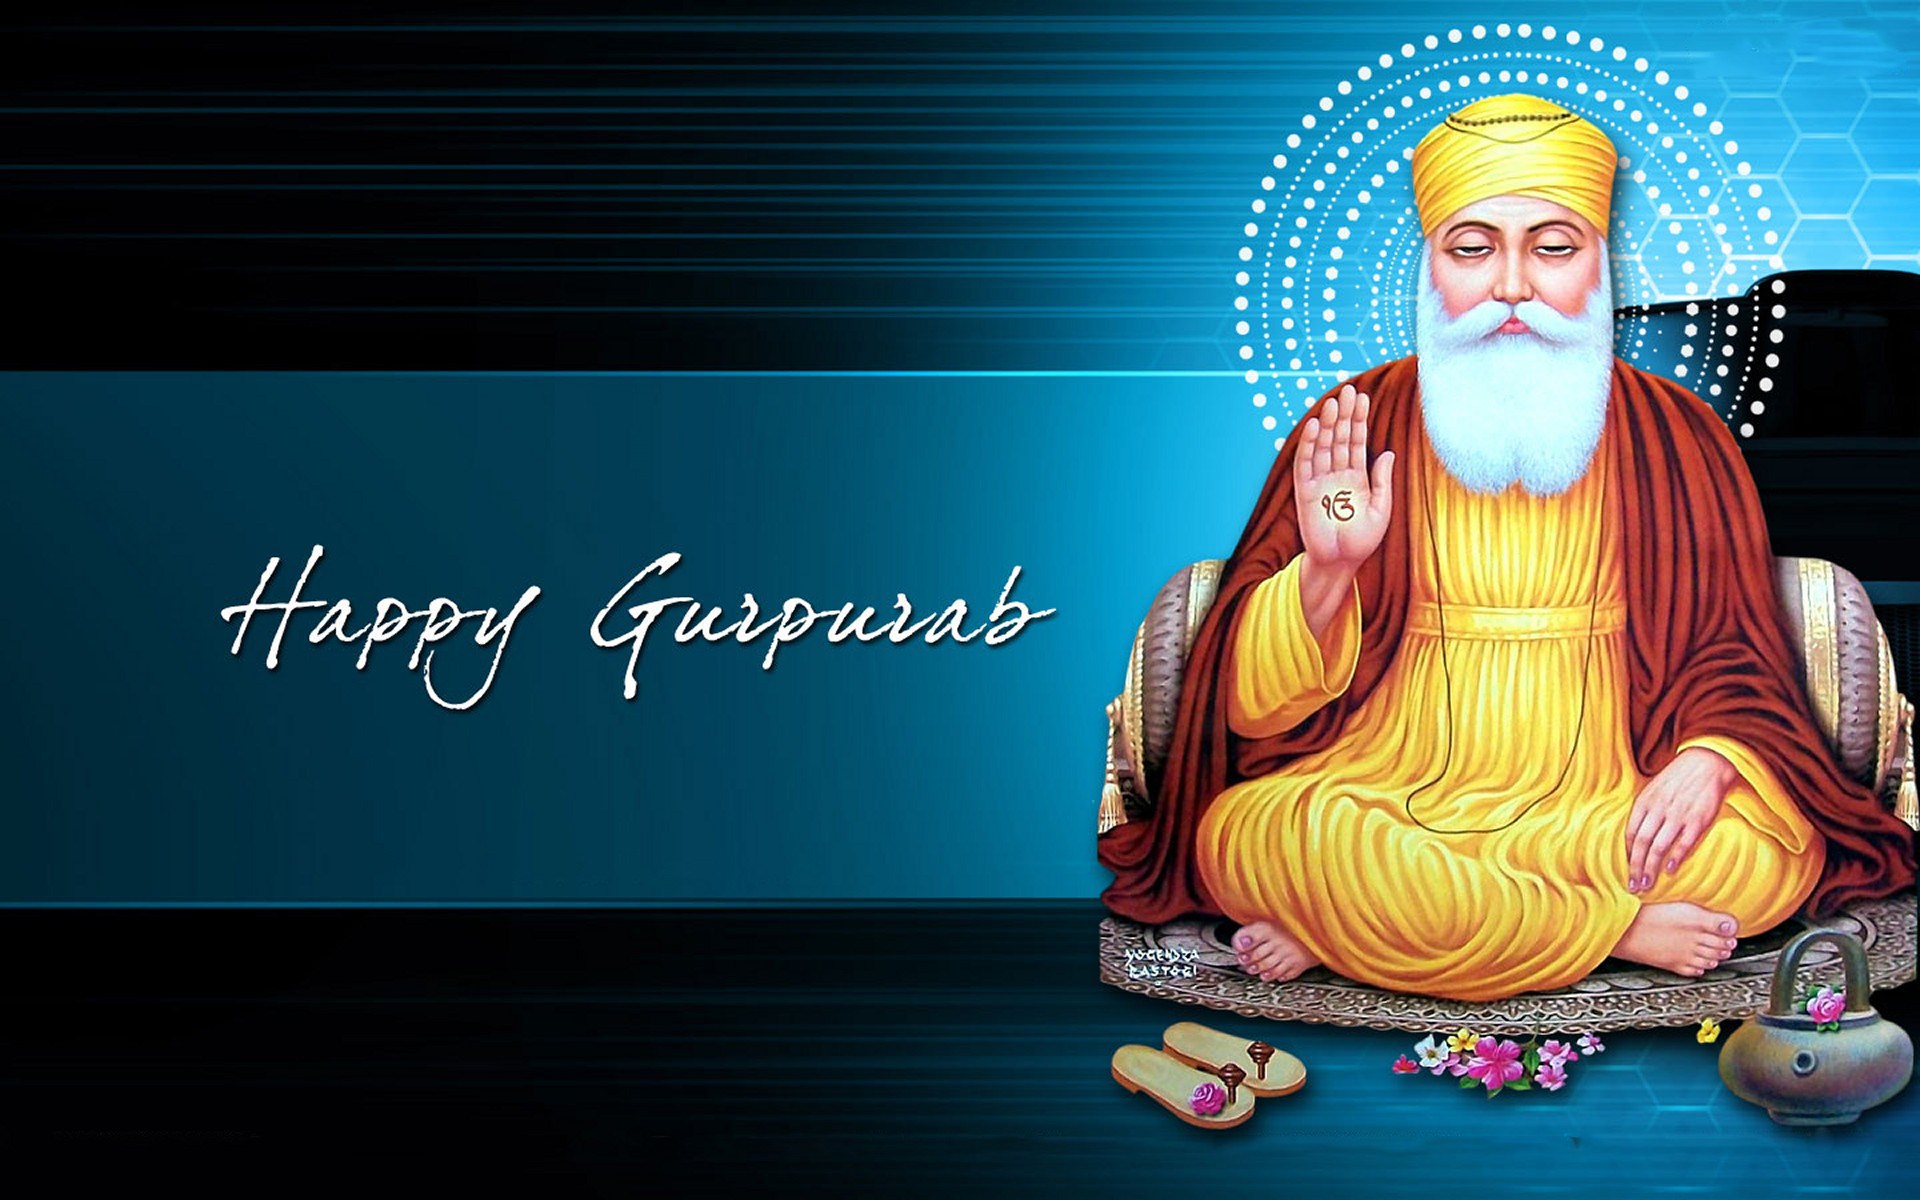 Happy Guru Purab Wishes, SMS, Images, Wallpapers, Pictures to celebrate